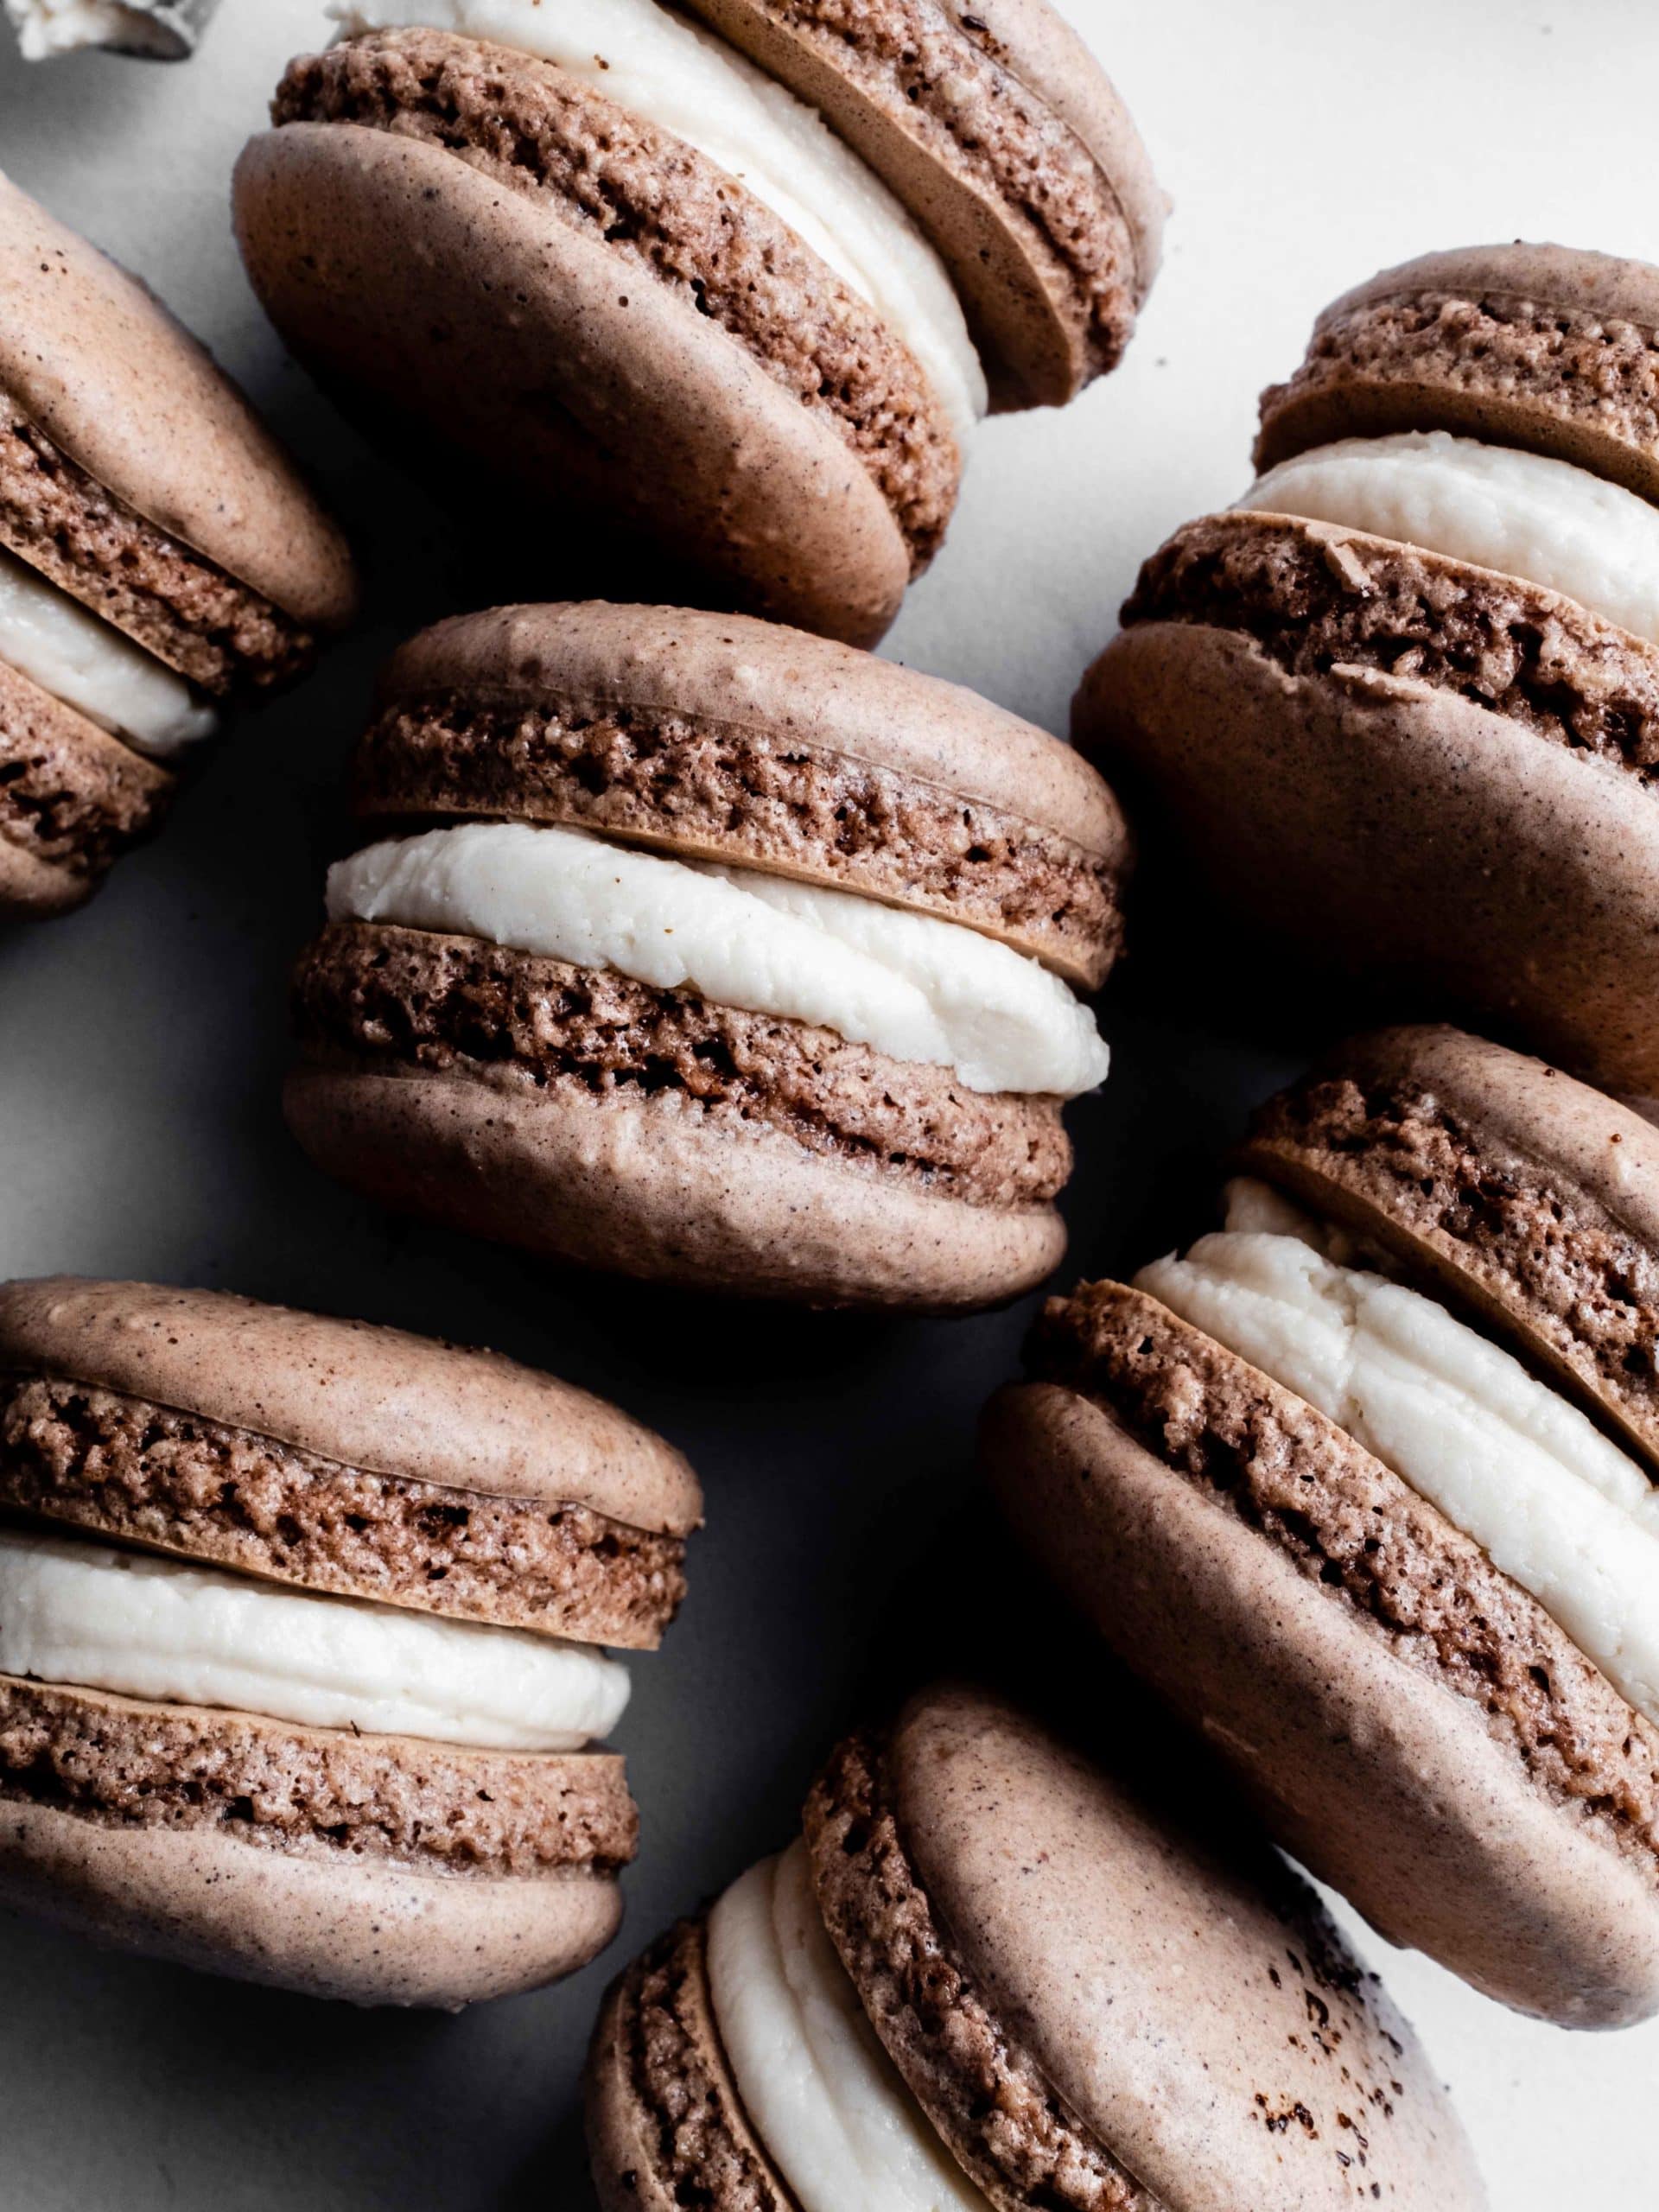 A group of macaroons with cream filling - Oreo